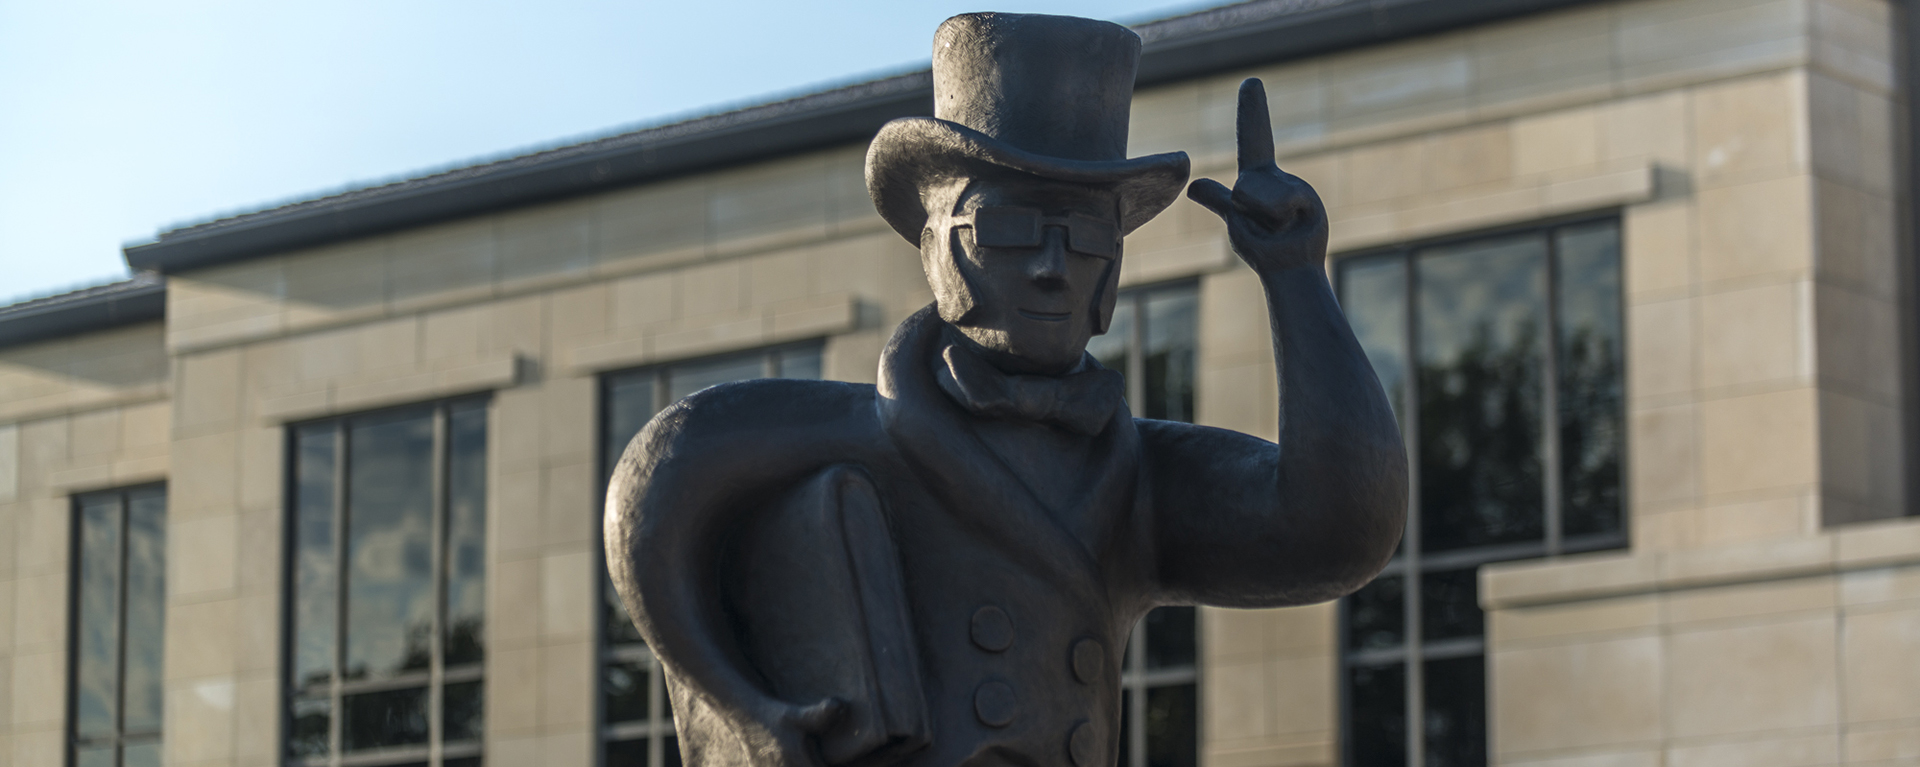 The Ichabod Statue is located in front of the Welcome Center, which opened in 2015.